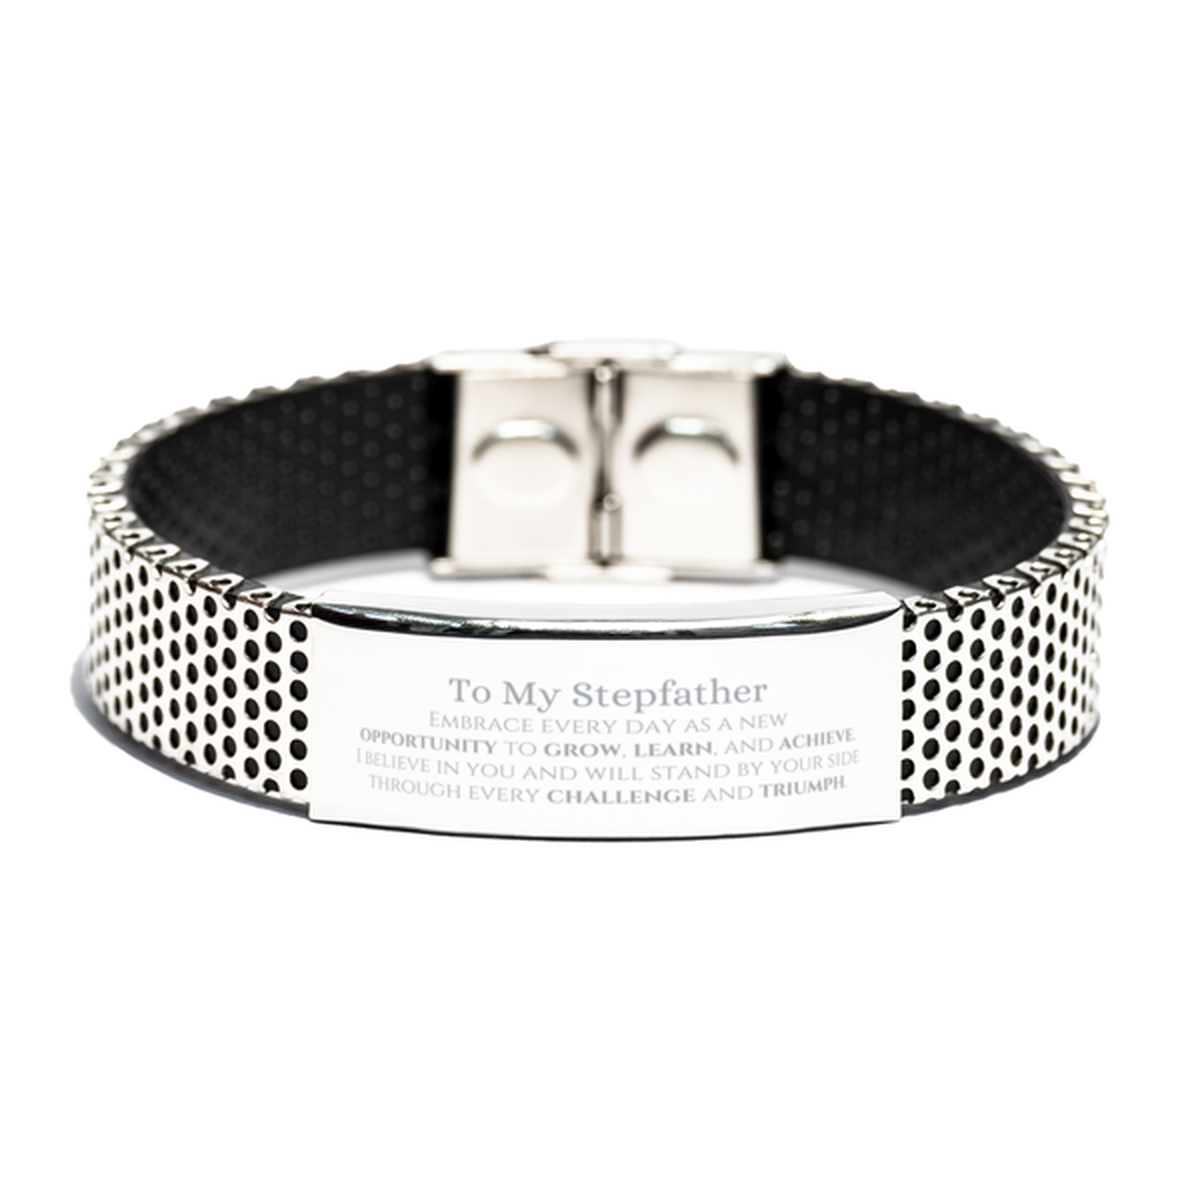 To My Stepfather Gifts, I believe in you and will stand by your side, Inspirational Stainless Steel Bracelet For Stepfather, Birthday Christmas Motivational Stepfather Gifts